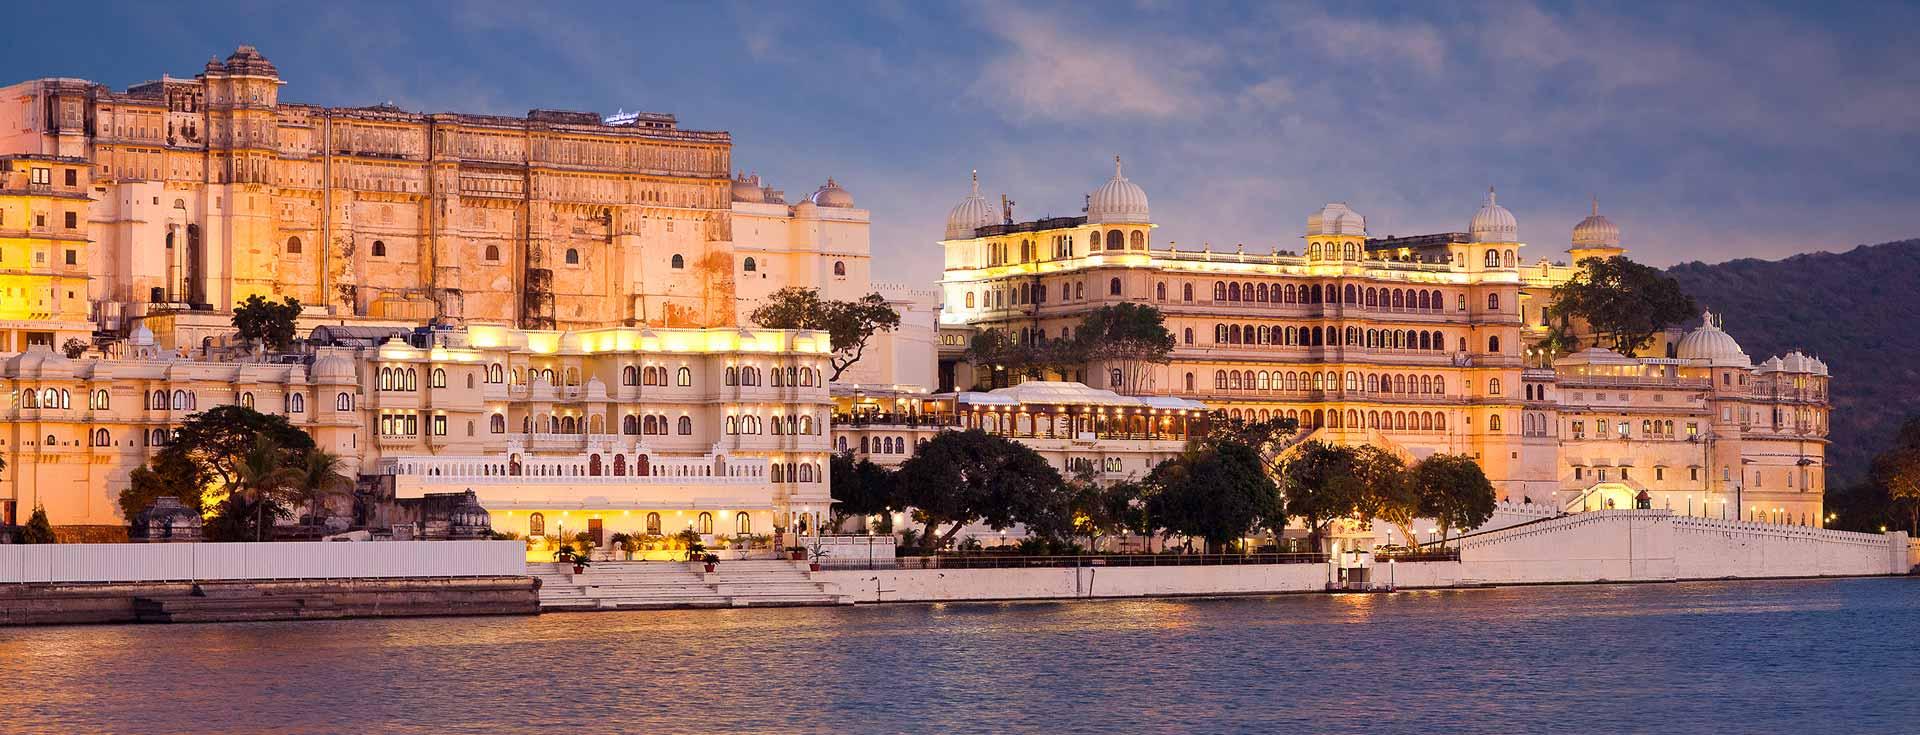 Enchanting palaces and forts you must visit in Udaipur